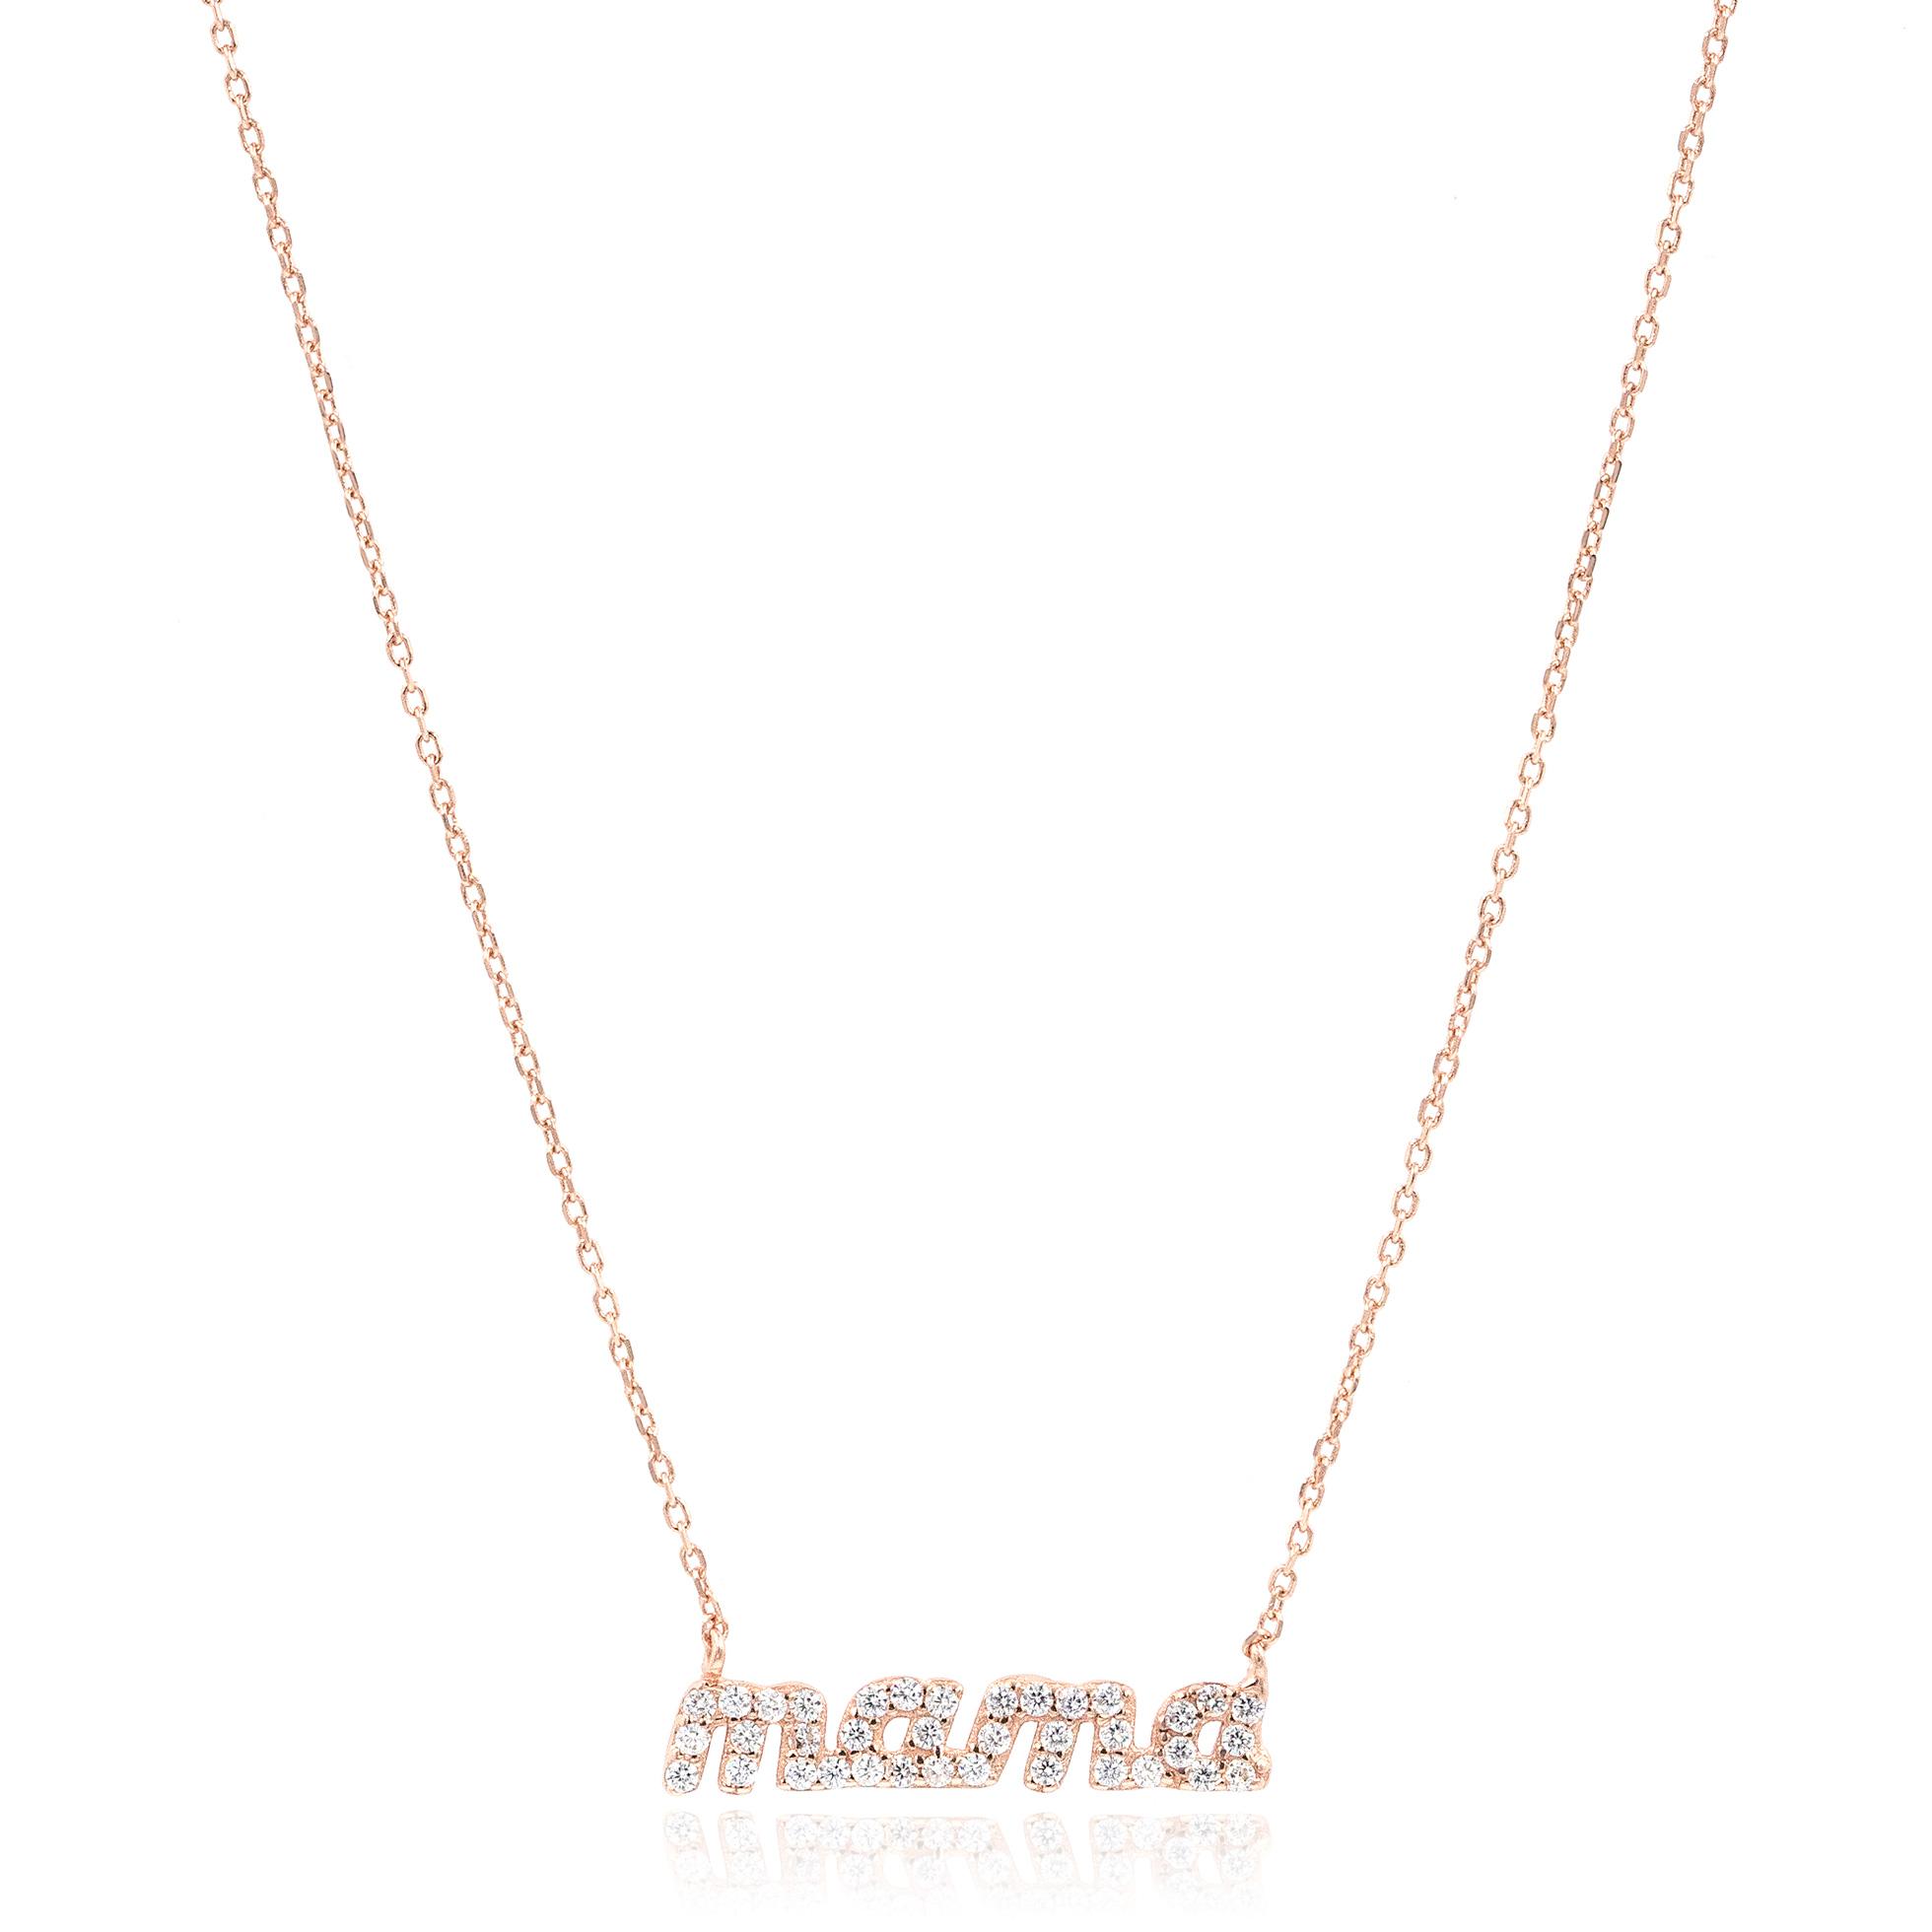 MAMA Necklace on Adelaide Mini in 14k Gold